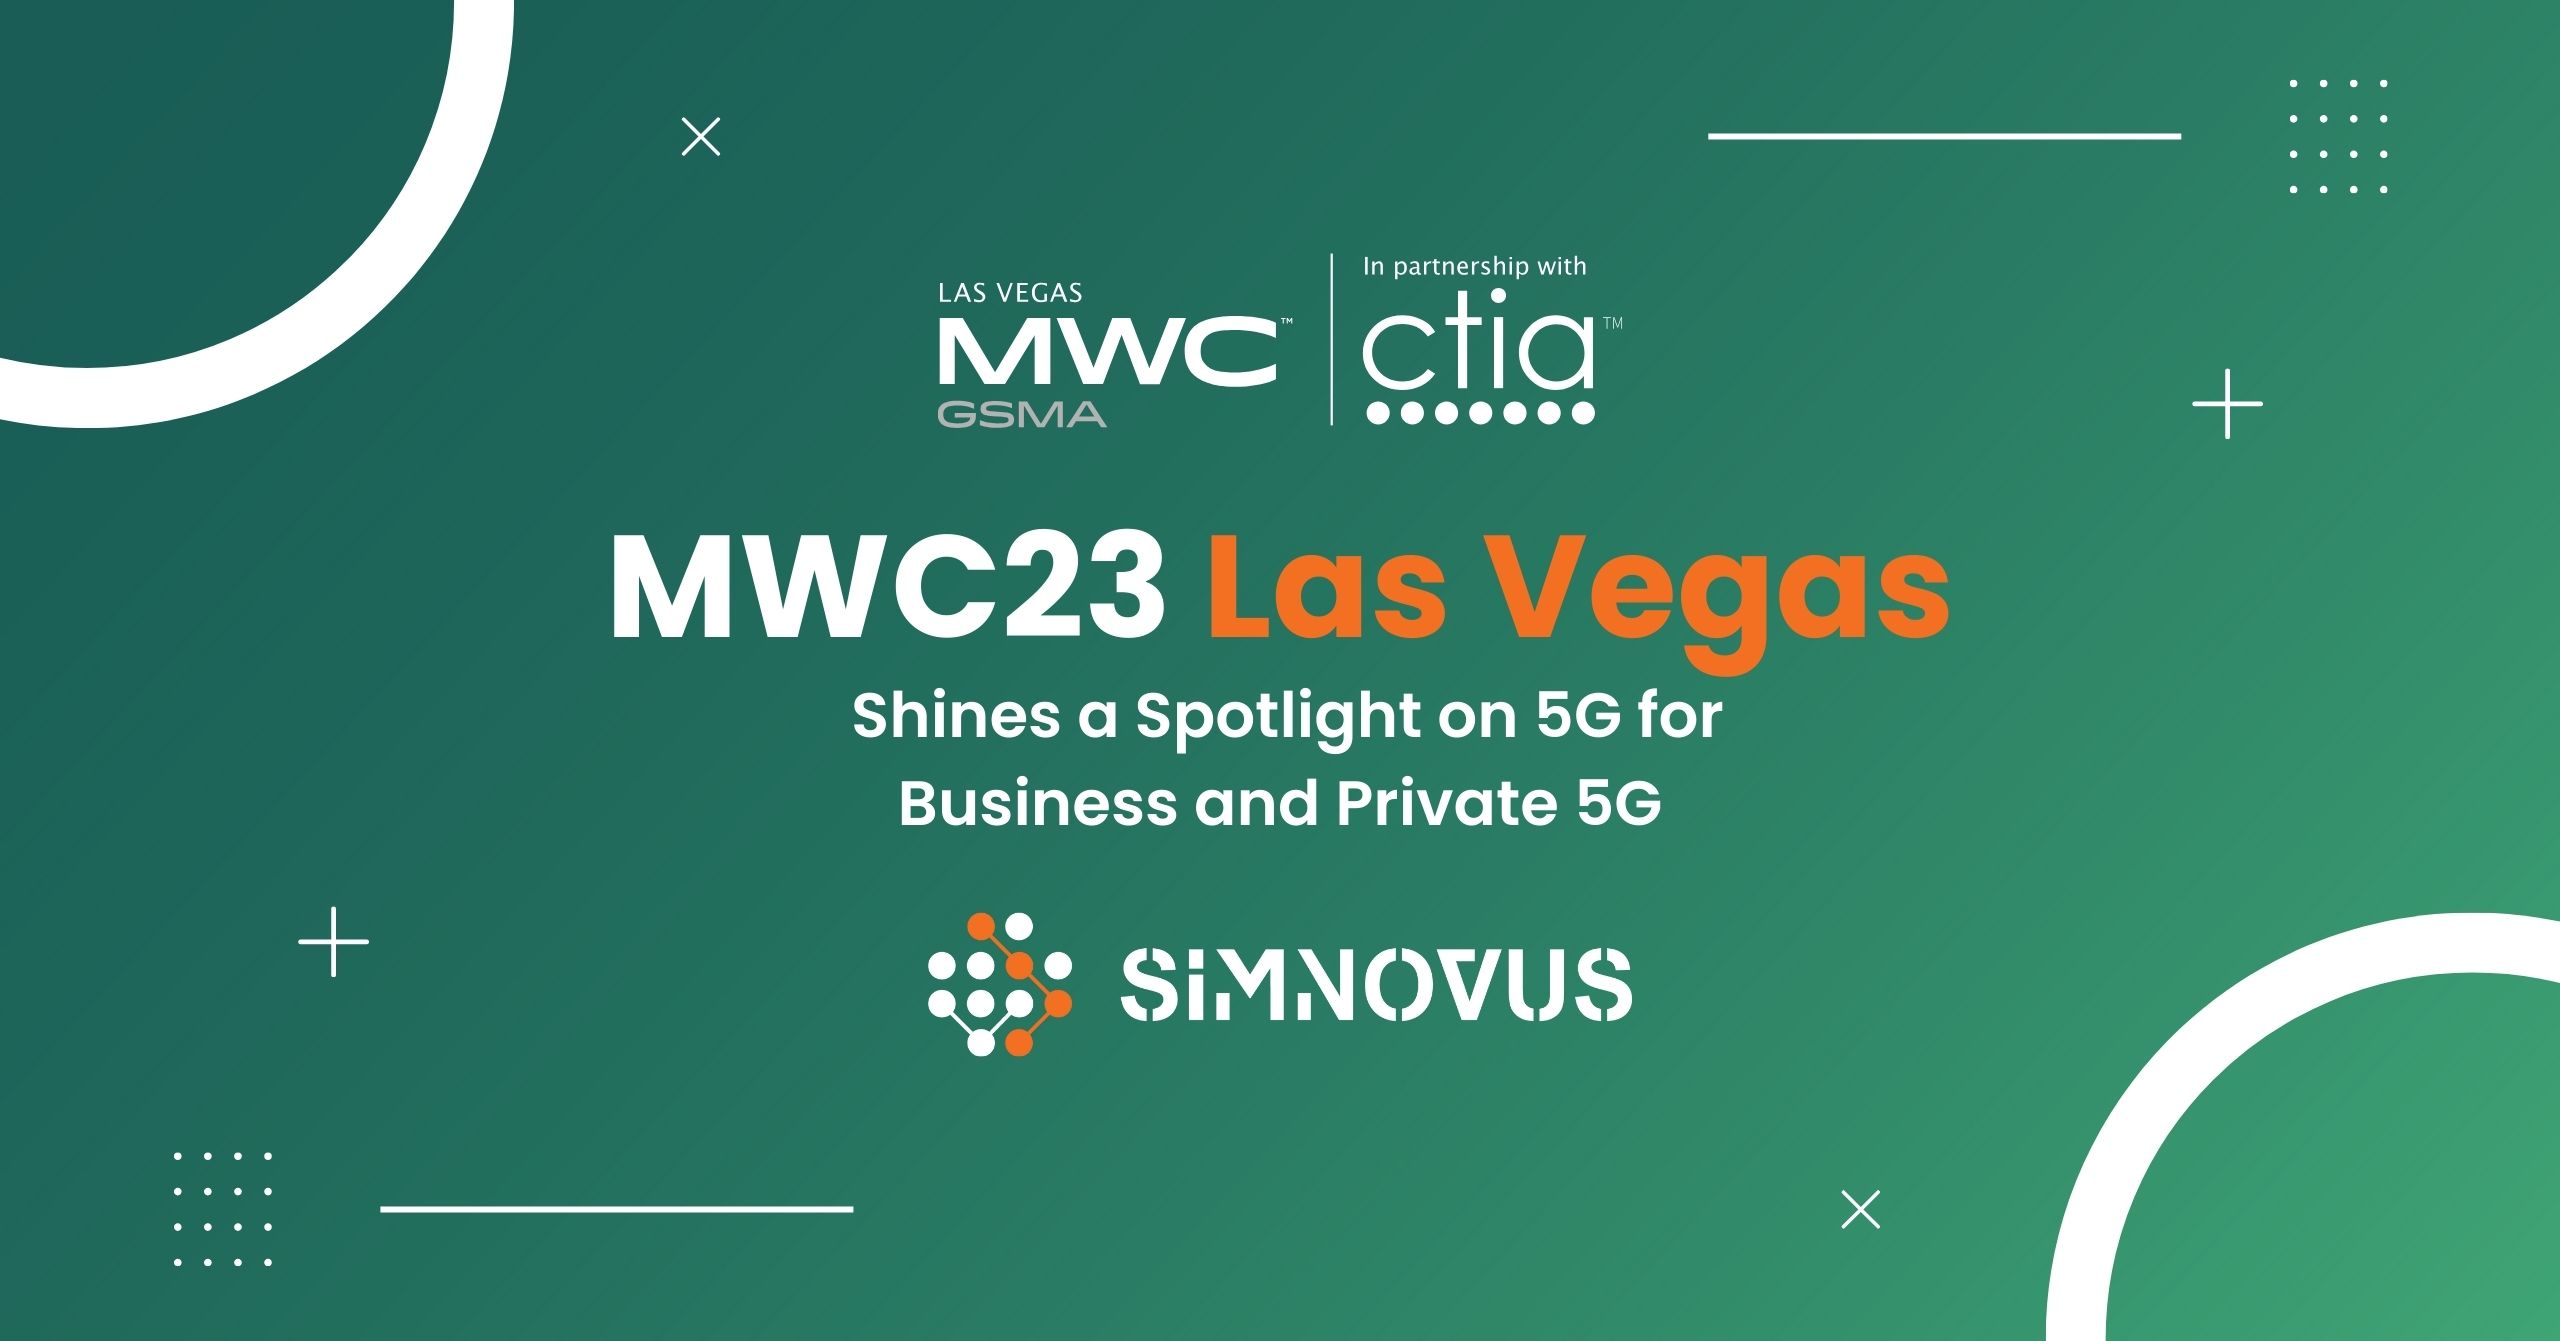 MWC23 Las Vegas Shines a Spotlight on 5G for Business and Private 5G